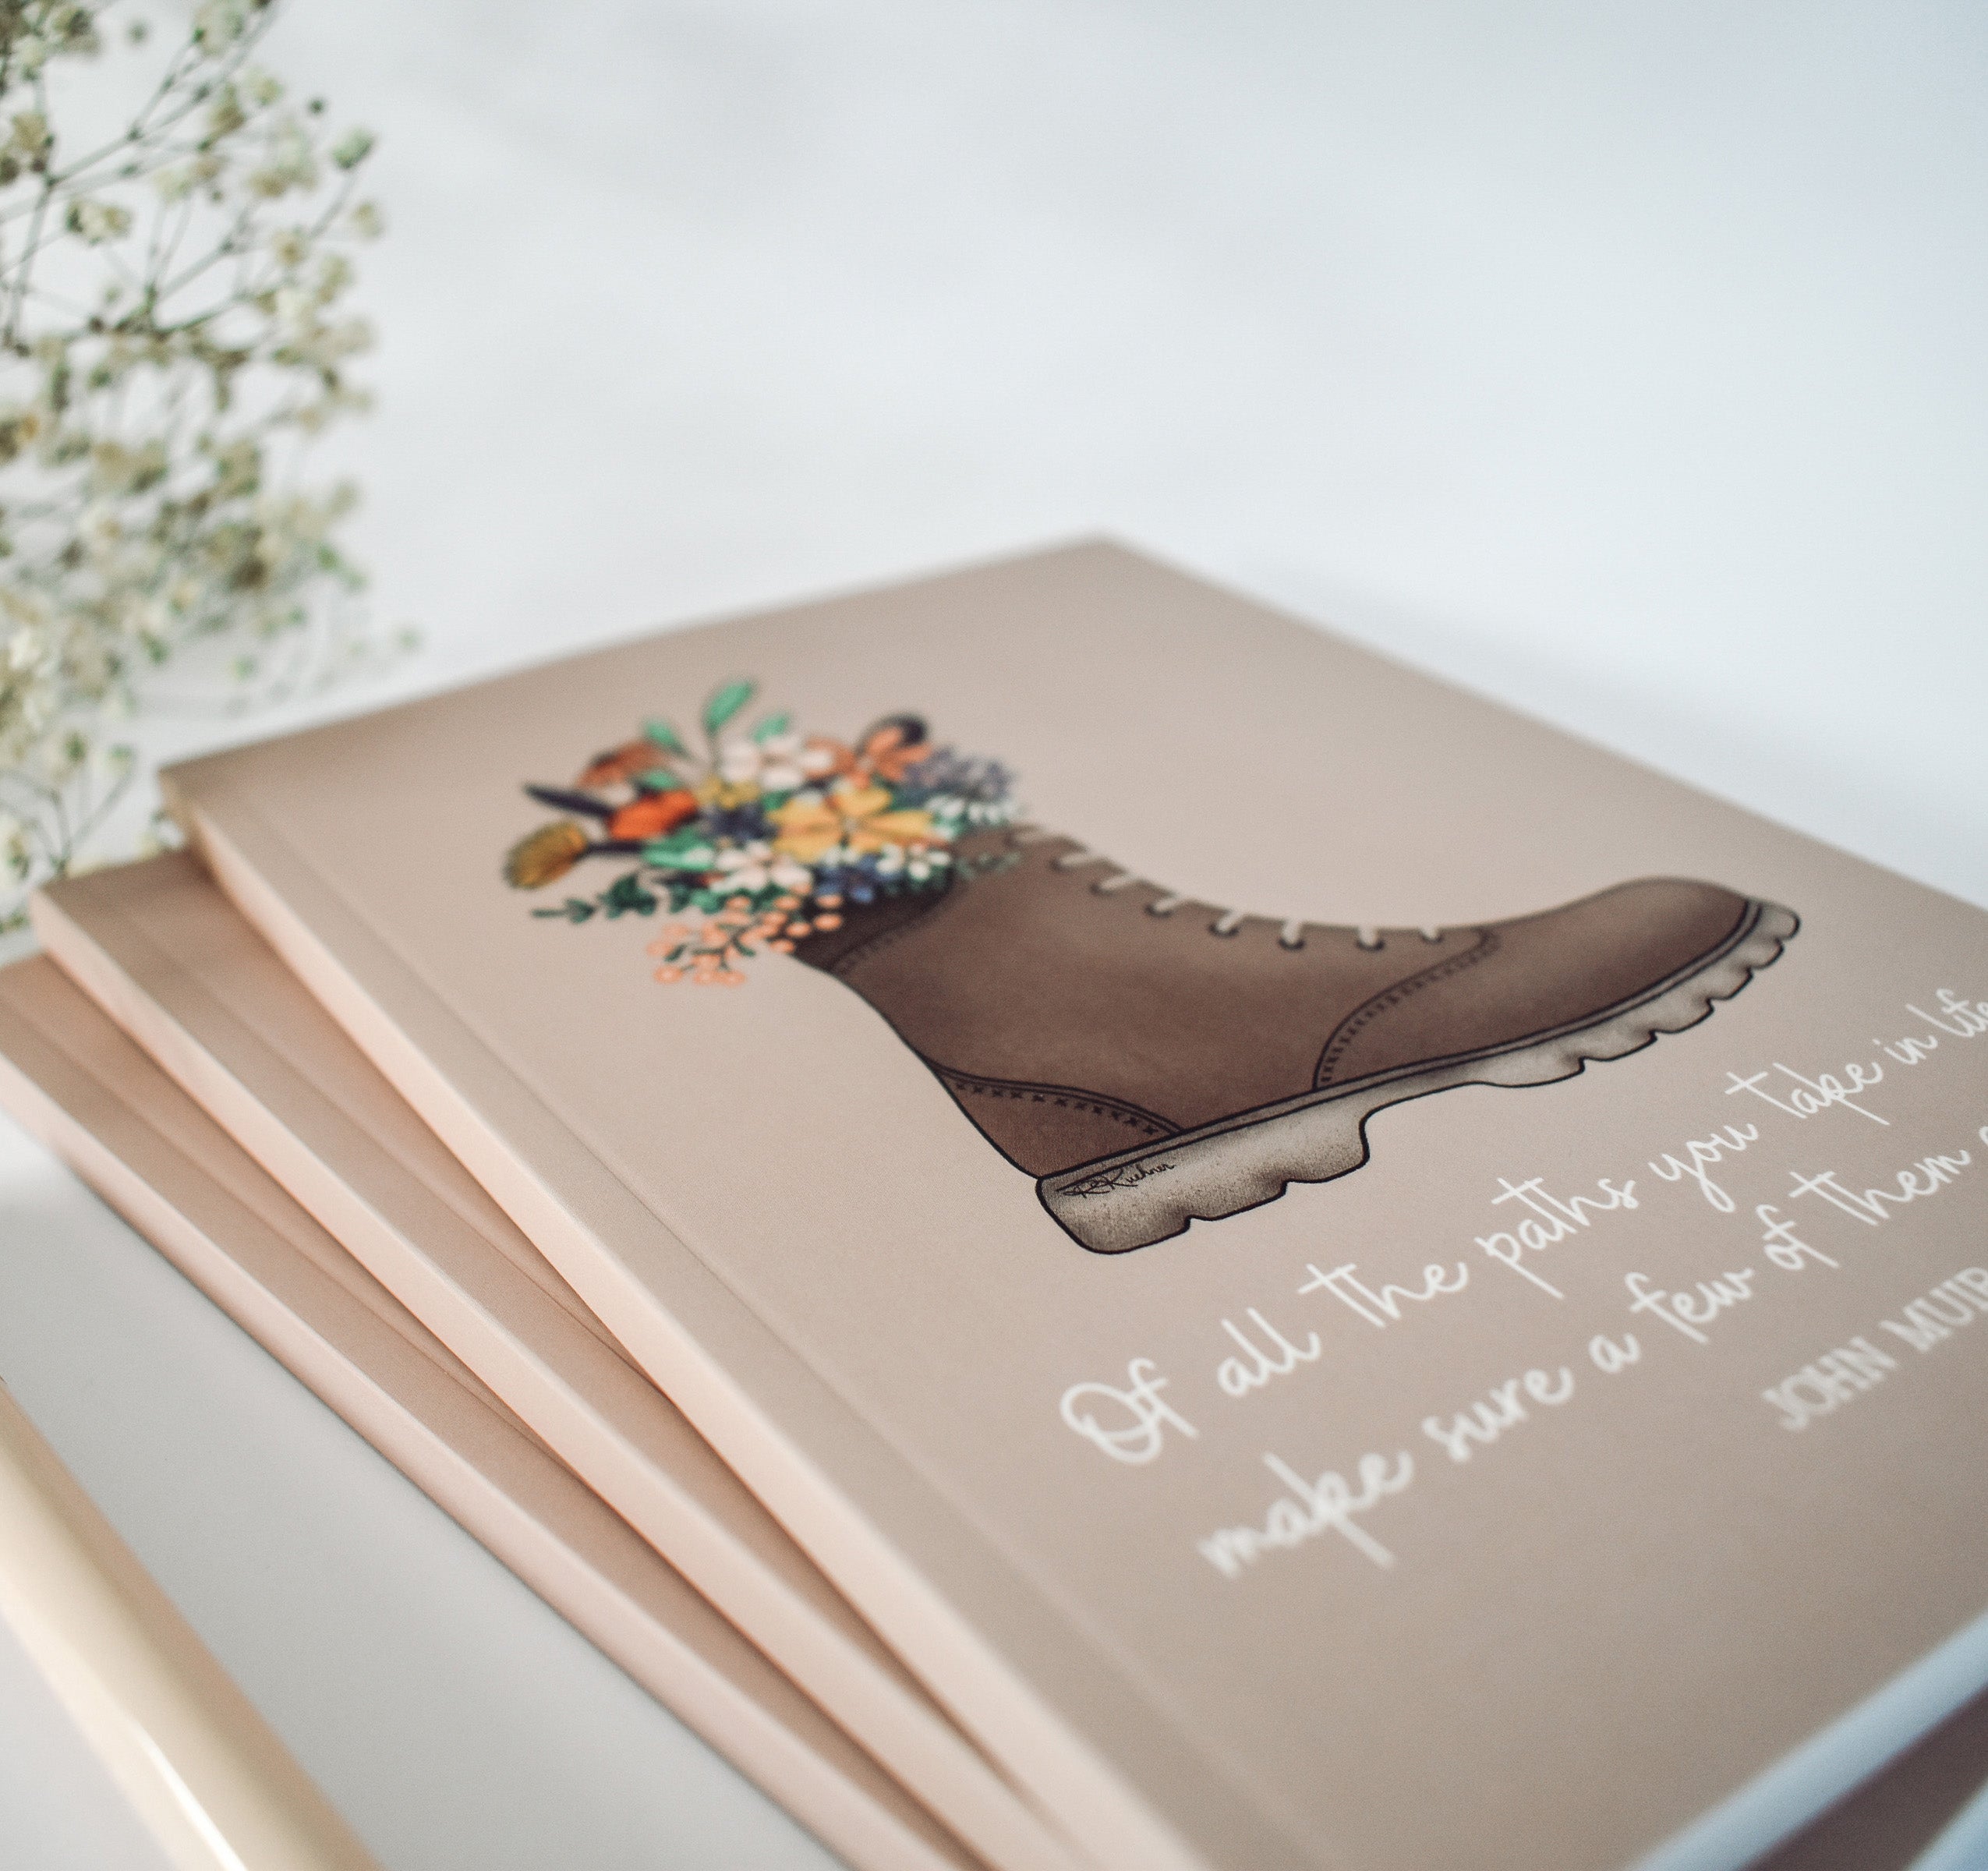 John Muir quote notebook with a hiking boot full of flowers